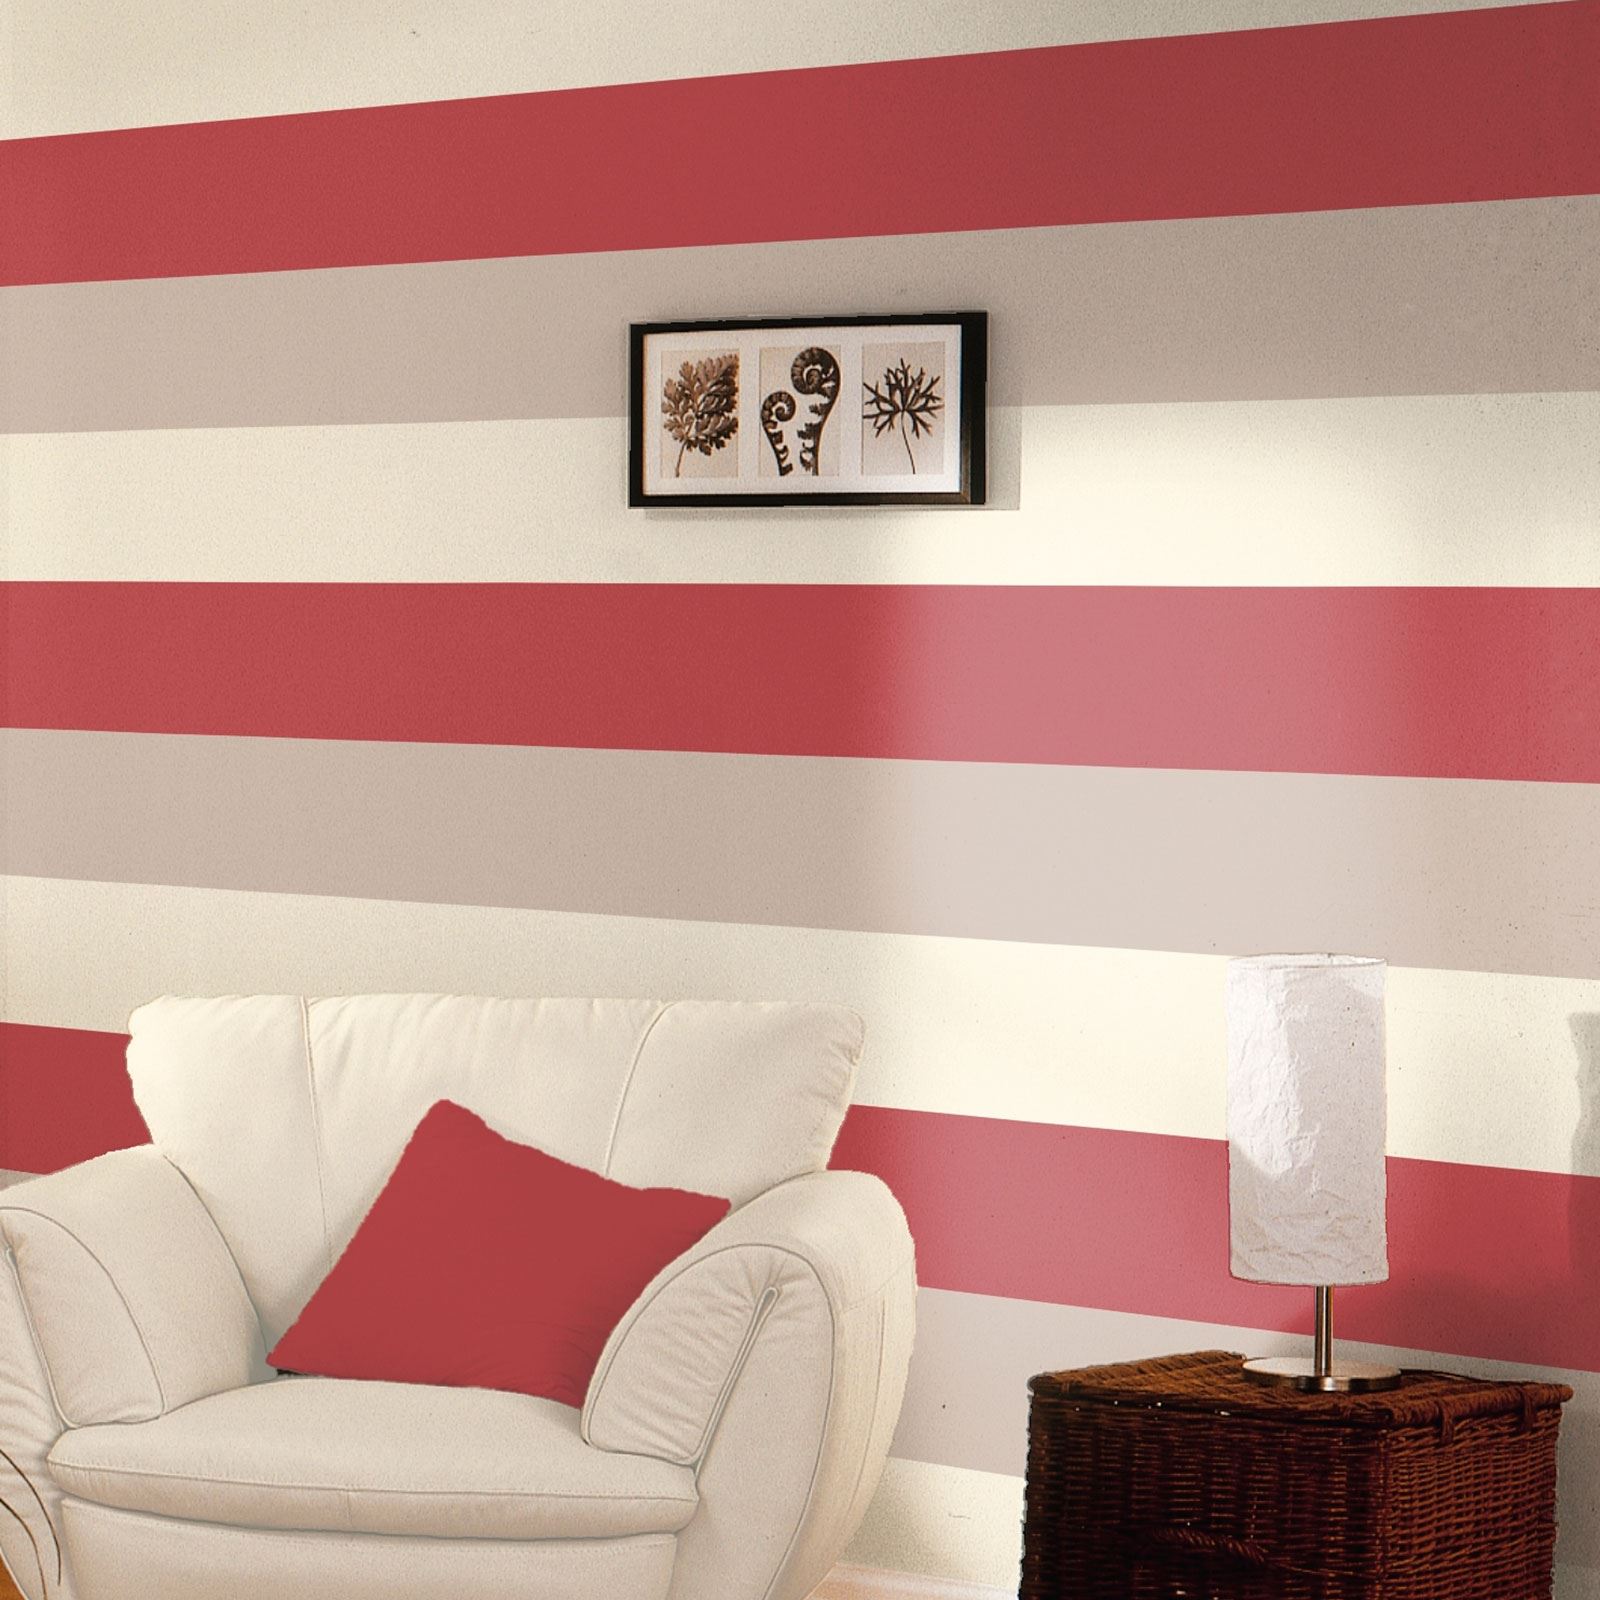 grey and cream striped wallpaper,wall,red,pink,room,interior design